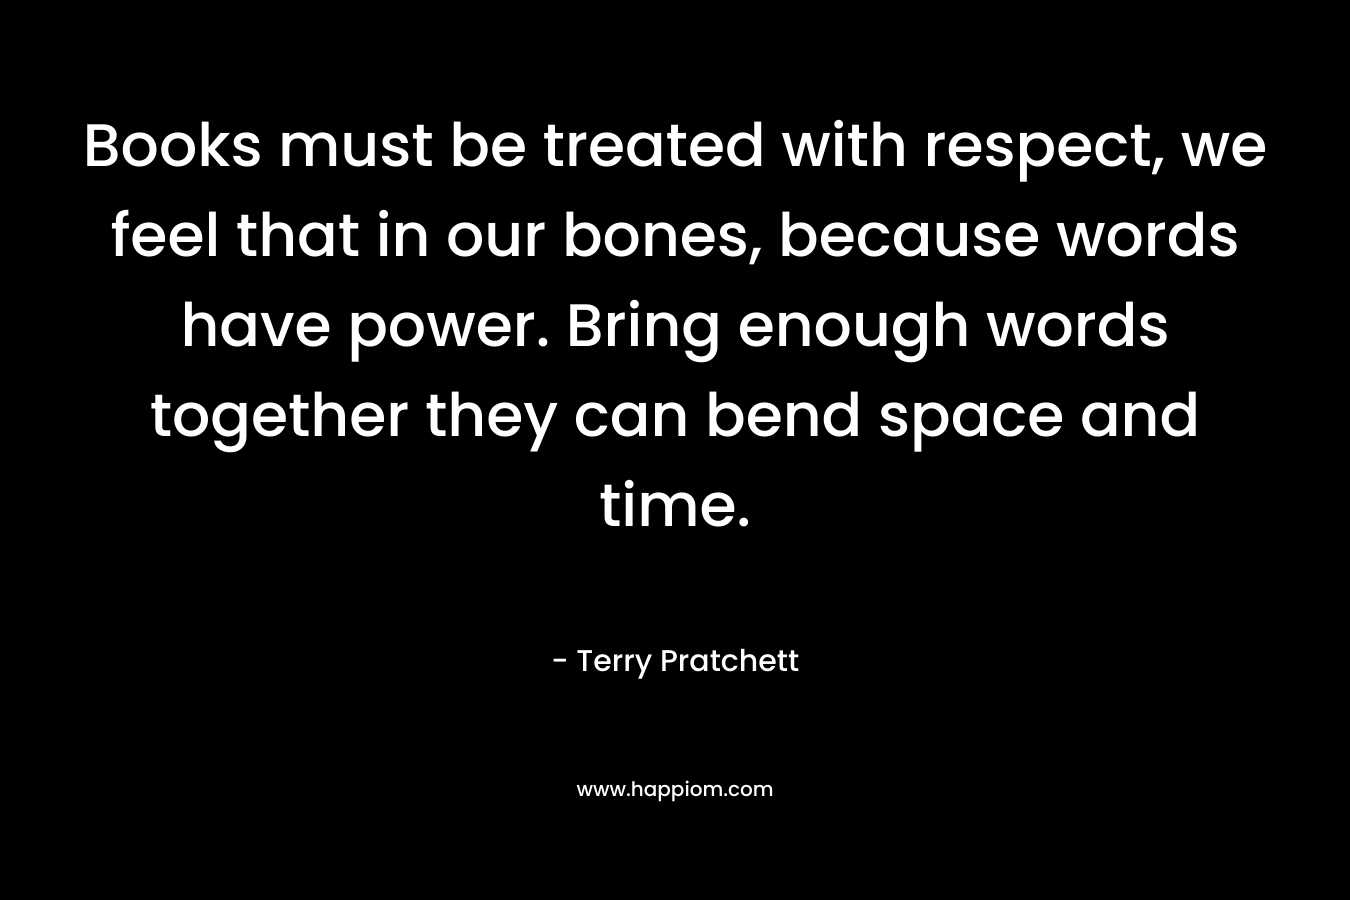 Books must be treated with respect, we feel that in our bones, because words have power. Bring enough words together they can bend space and time.